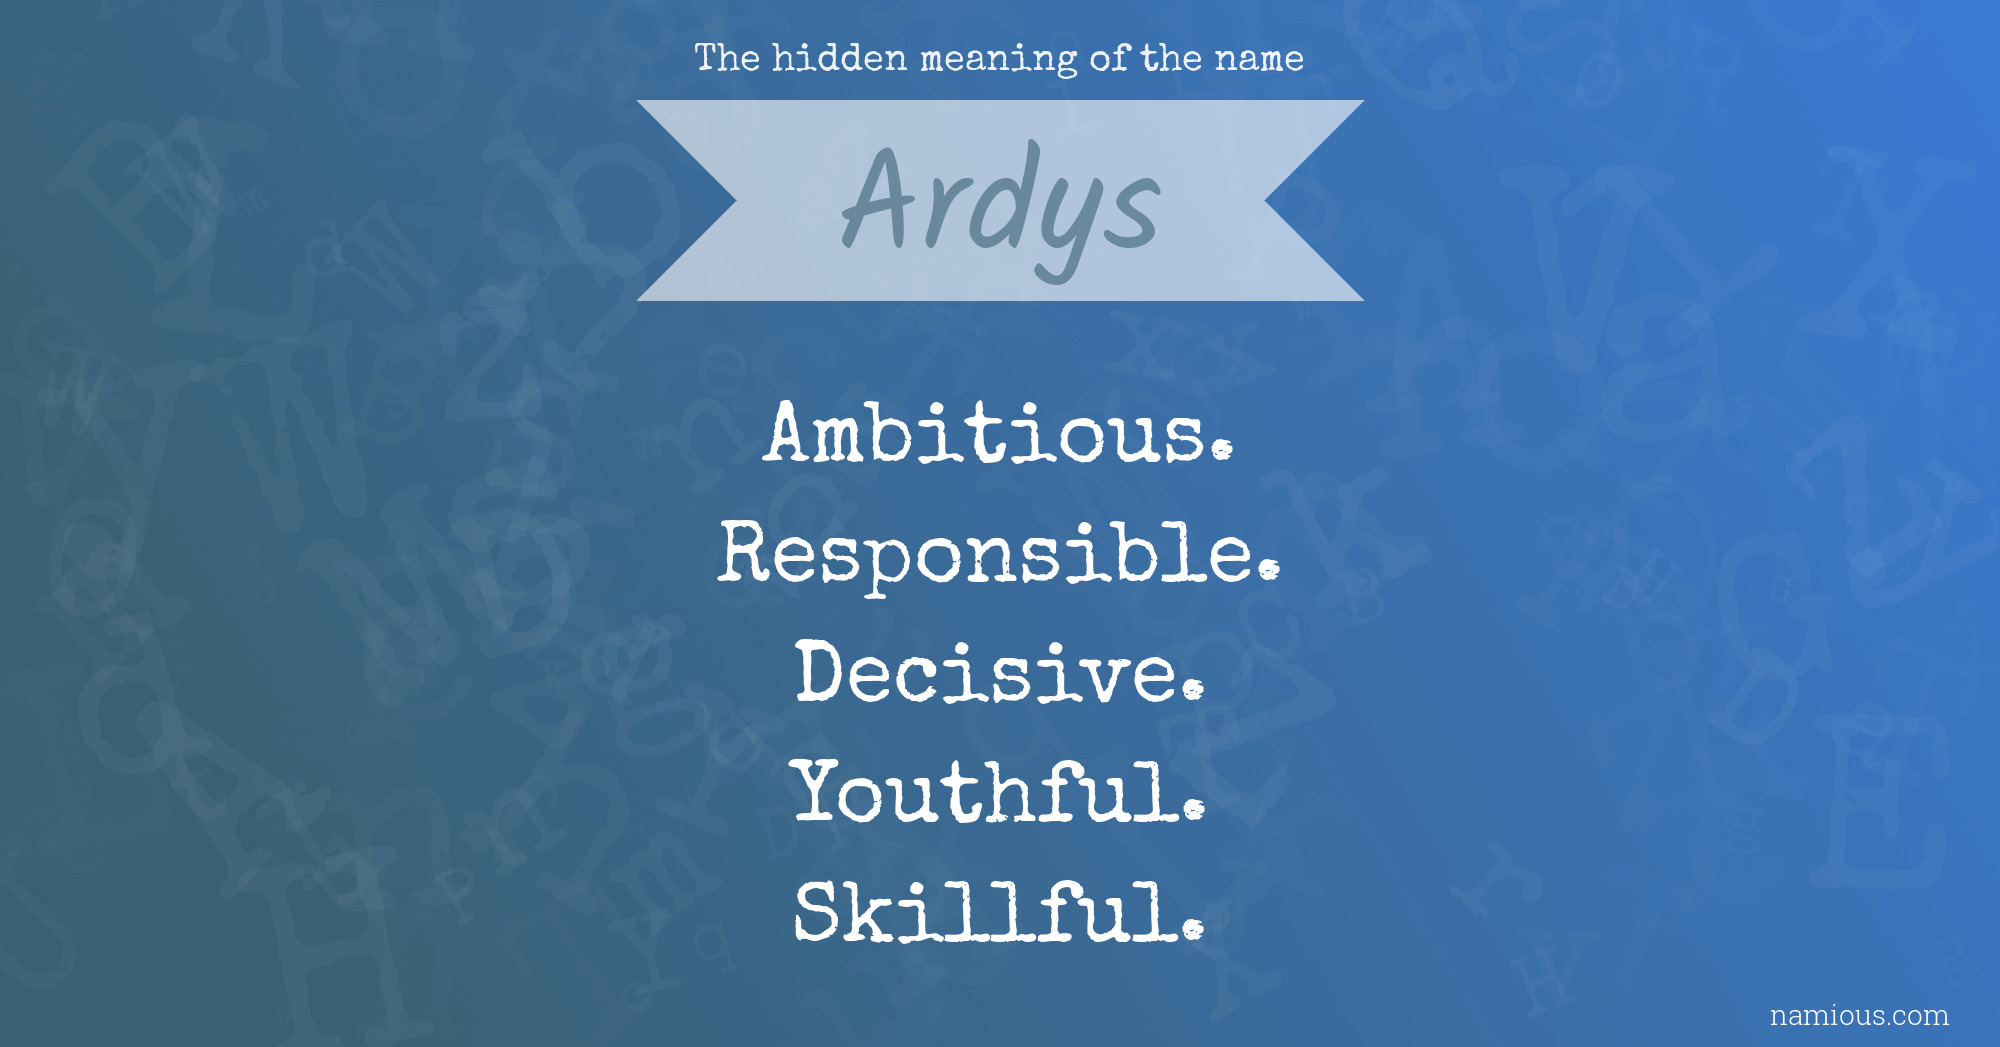 The hidden meaning of the name Ardys